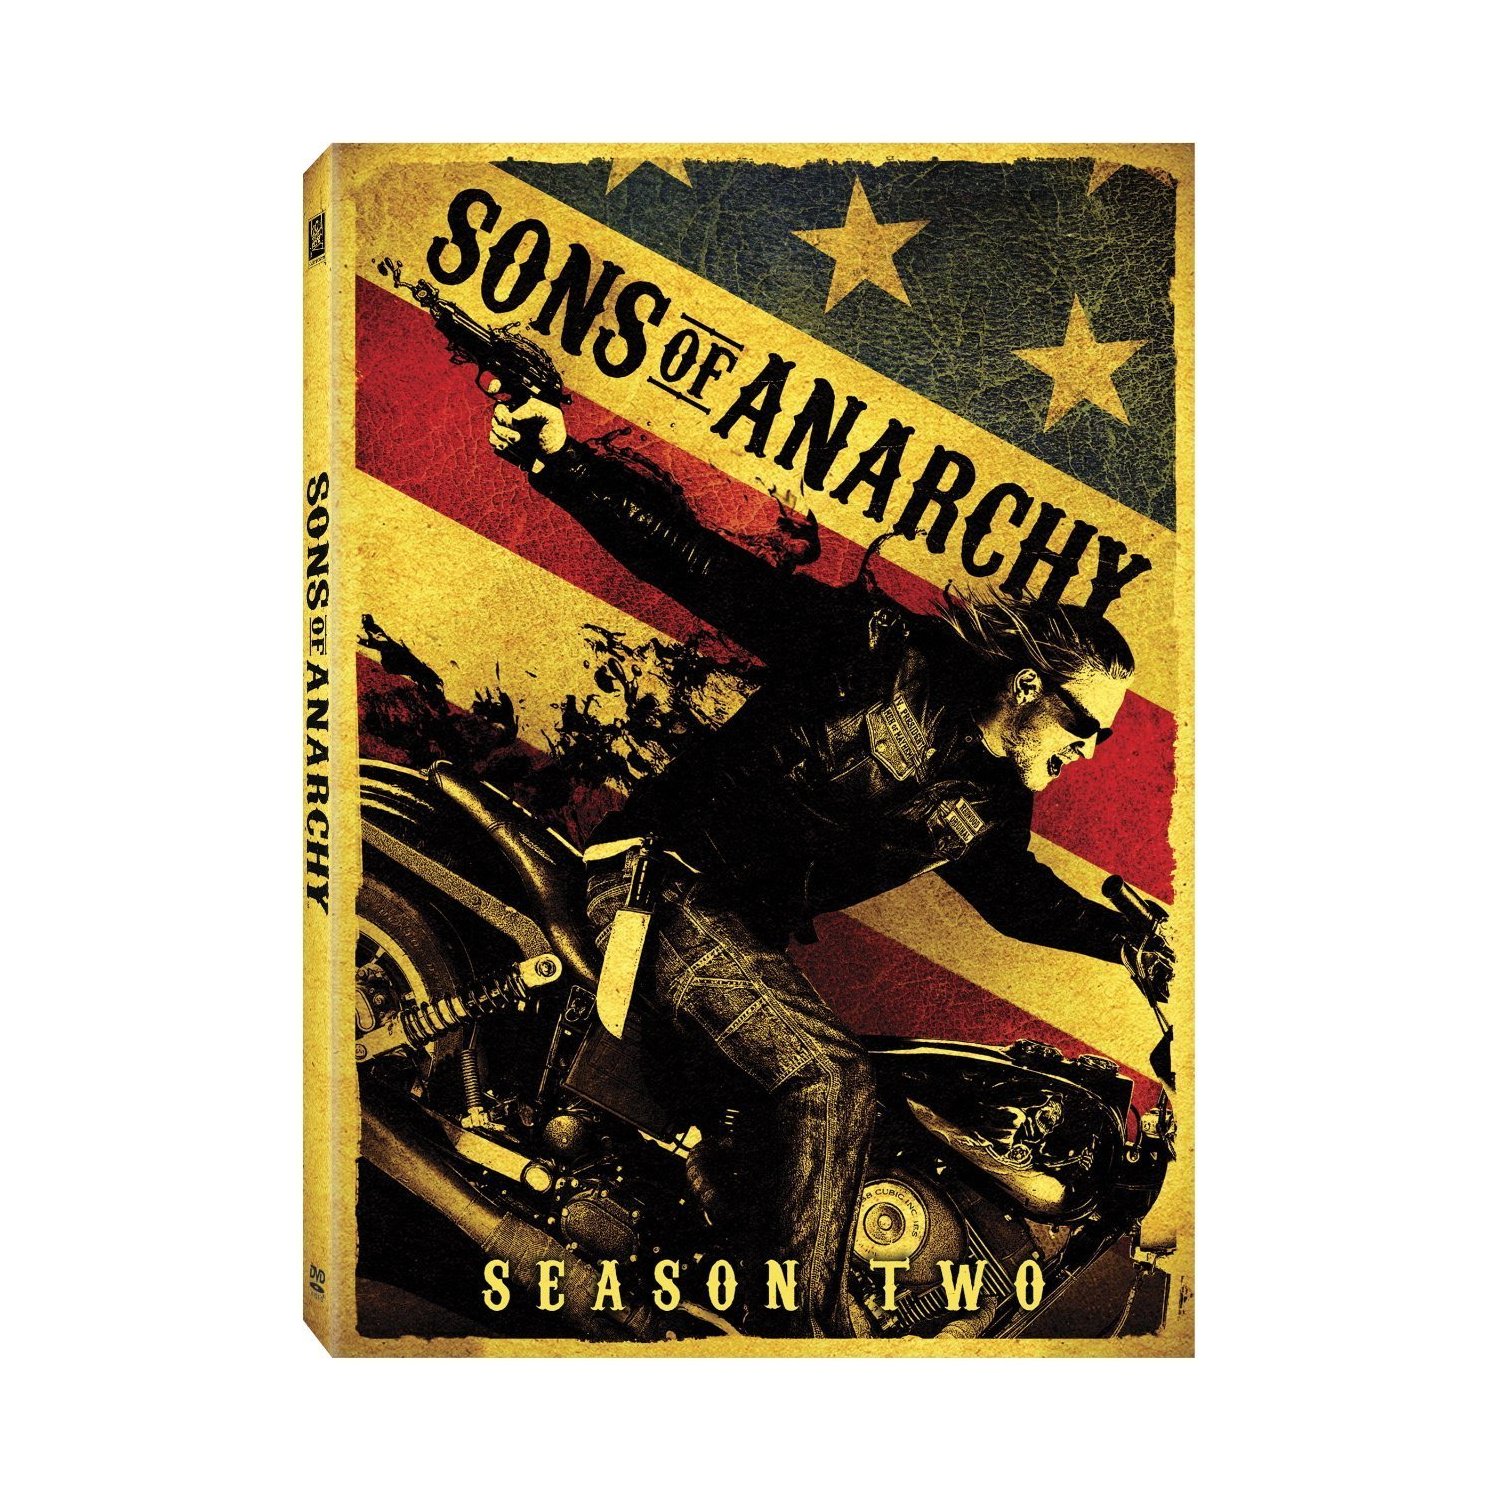 Sons of Anarchy Season 2 Disk 2